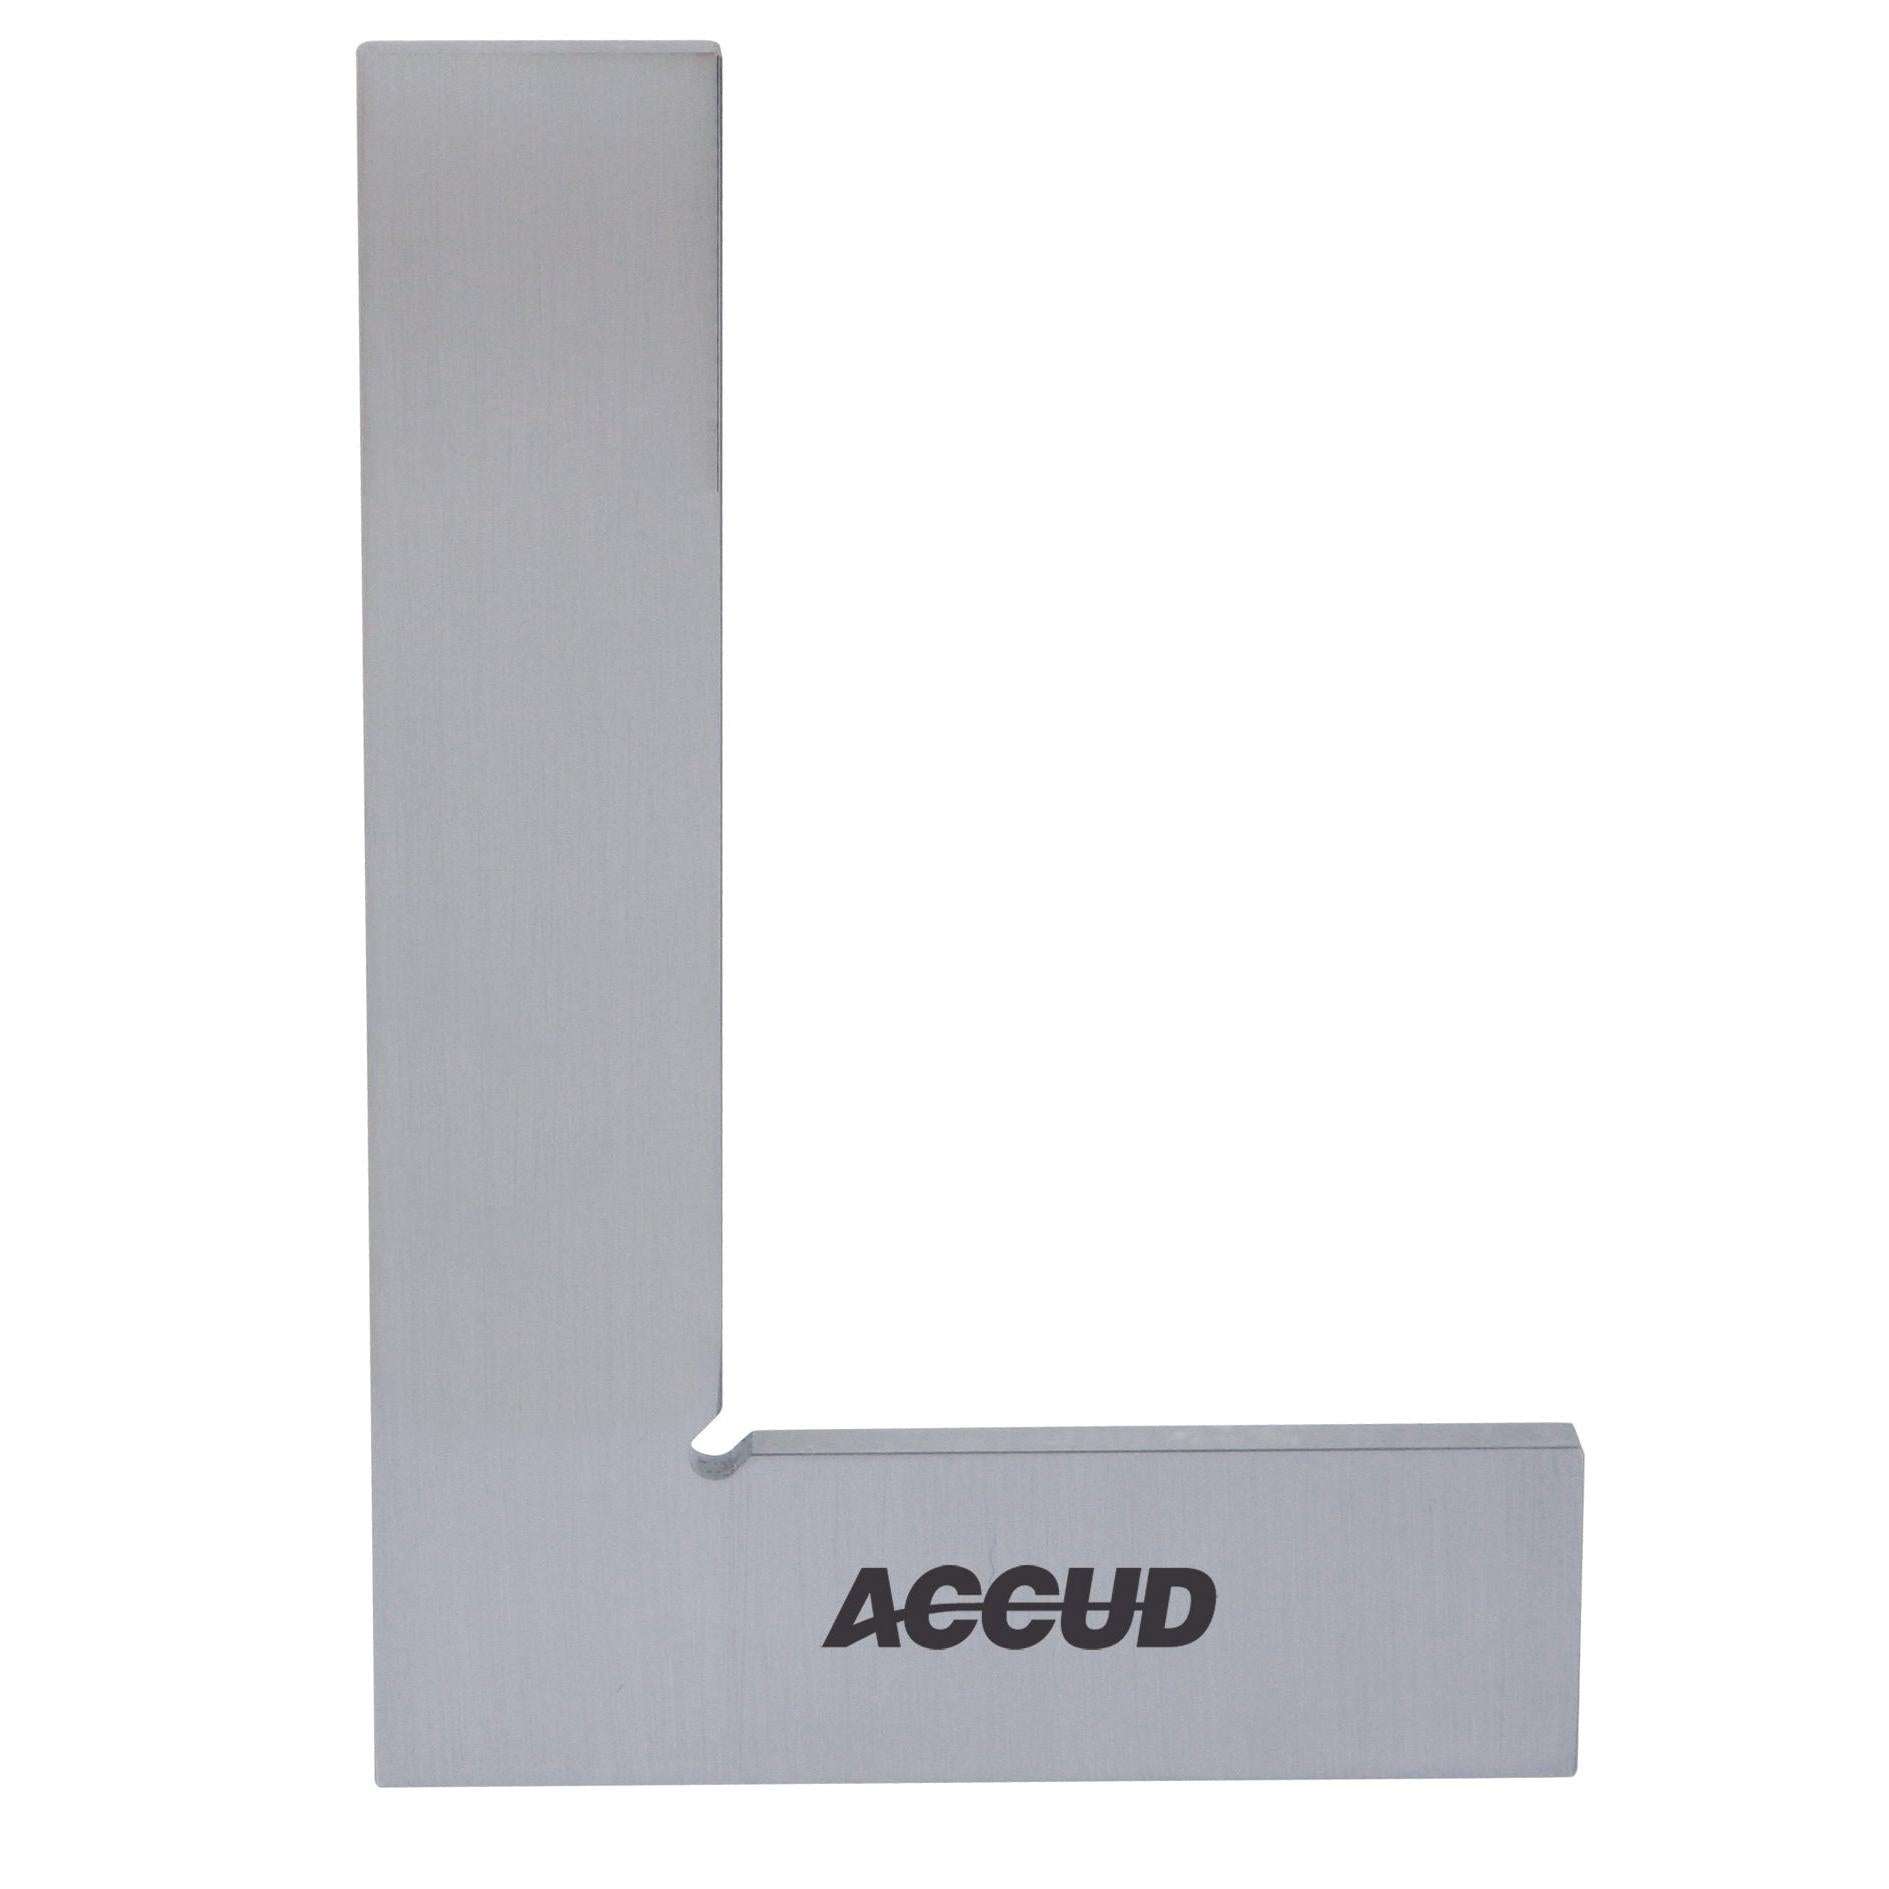 ACCUD | Flat Edge Square 50X40Mm | 841-002-10 Power Tool Services